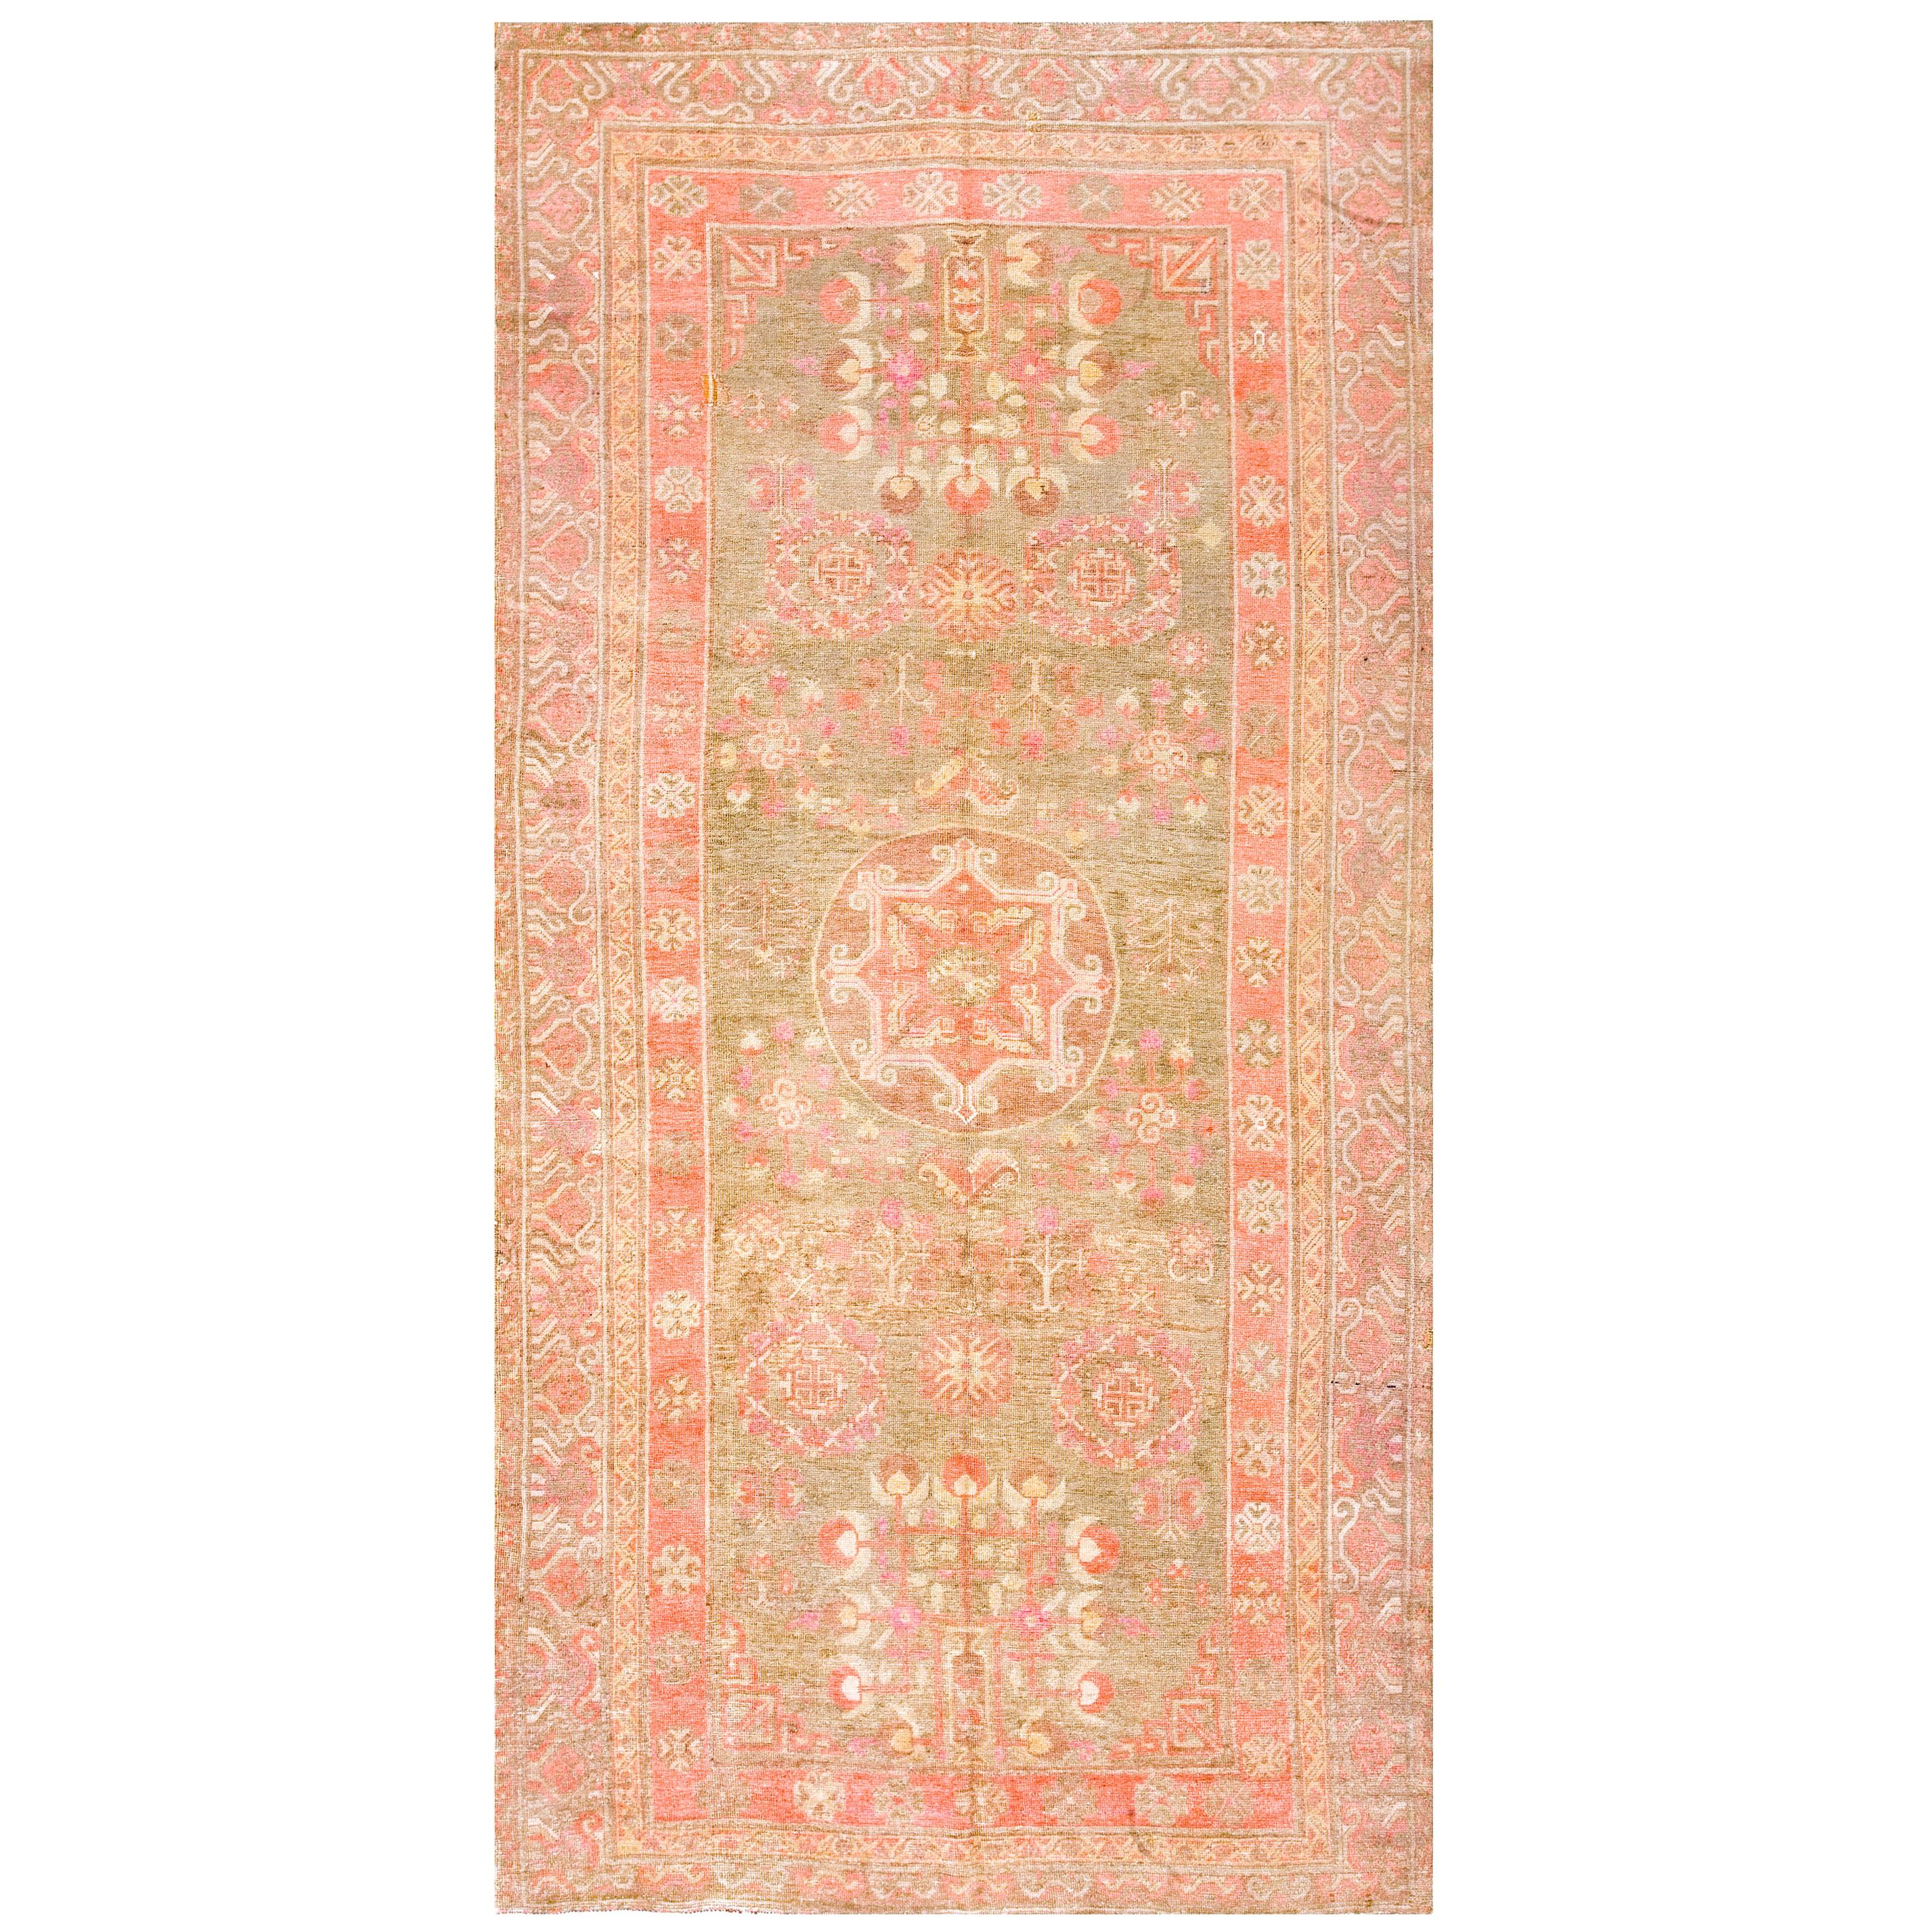 Early 20th Century Central Asian Khotan Carpet ( 5'6" x 11'2" - 168 x 340 ) For Sale